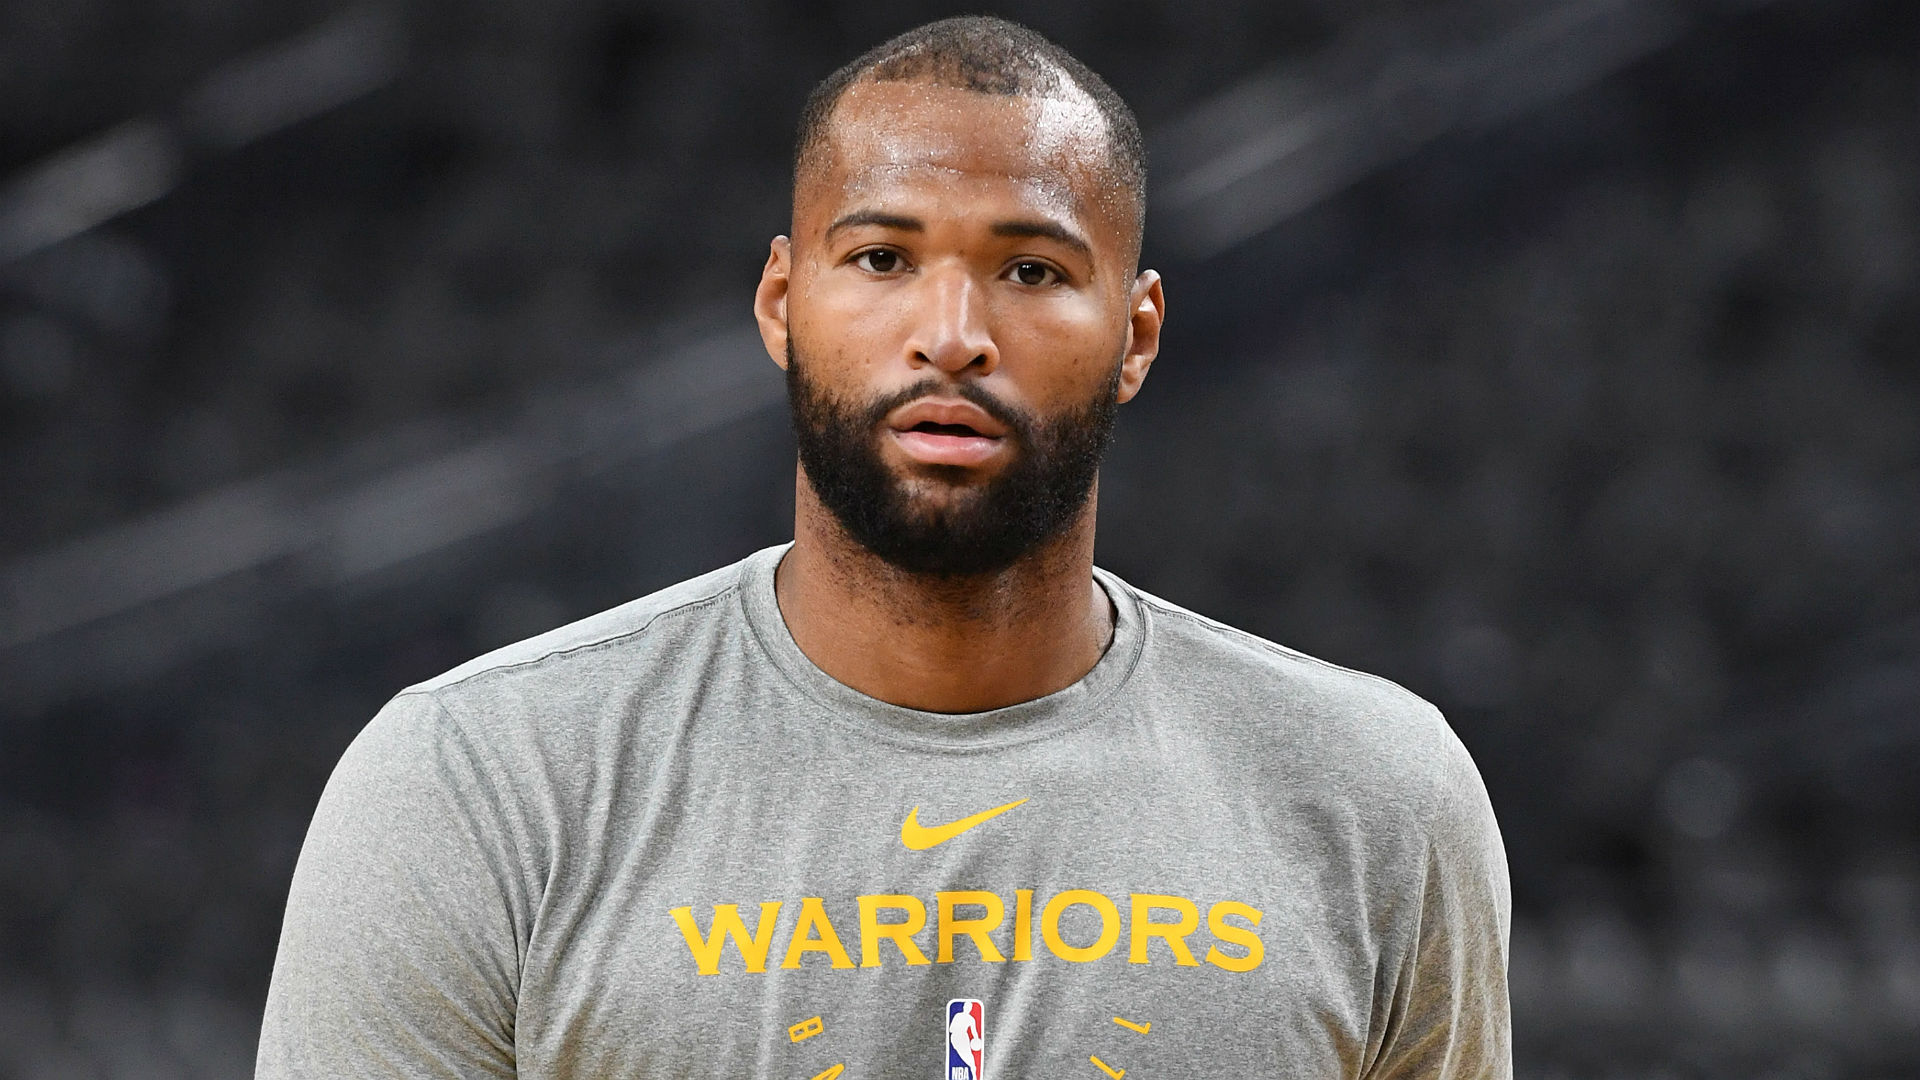 NBA All-Star DeMarcus Cousins threw down a dunk for his first points as a Golden State Warrior.